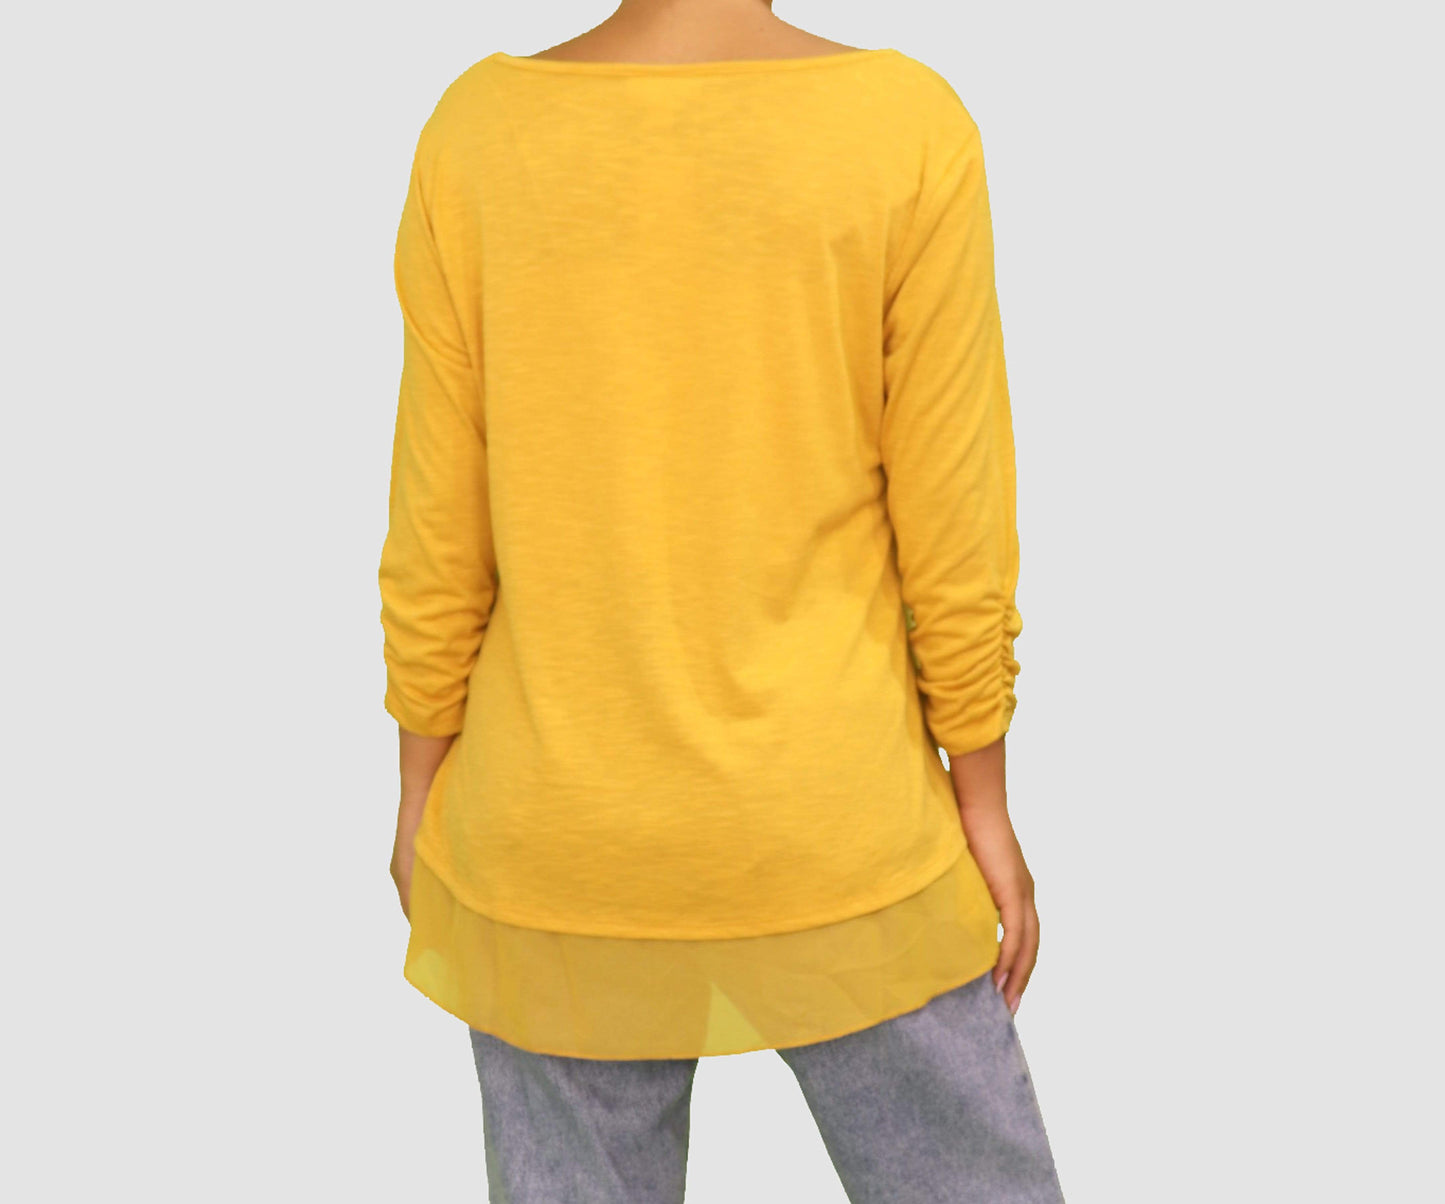 Style & Co Womens Tops S / Mustard Long Sleeve Top